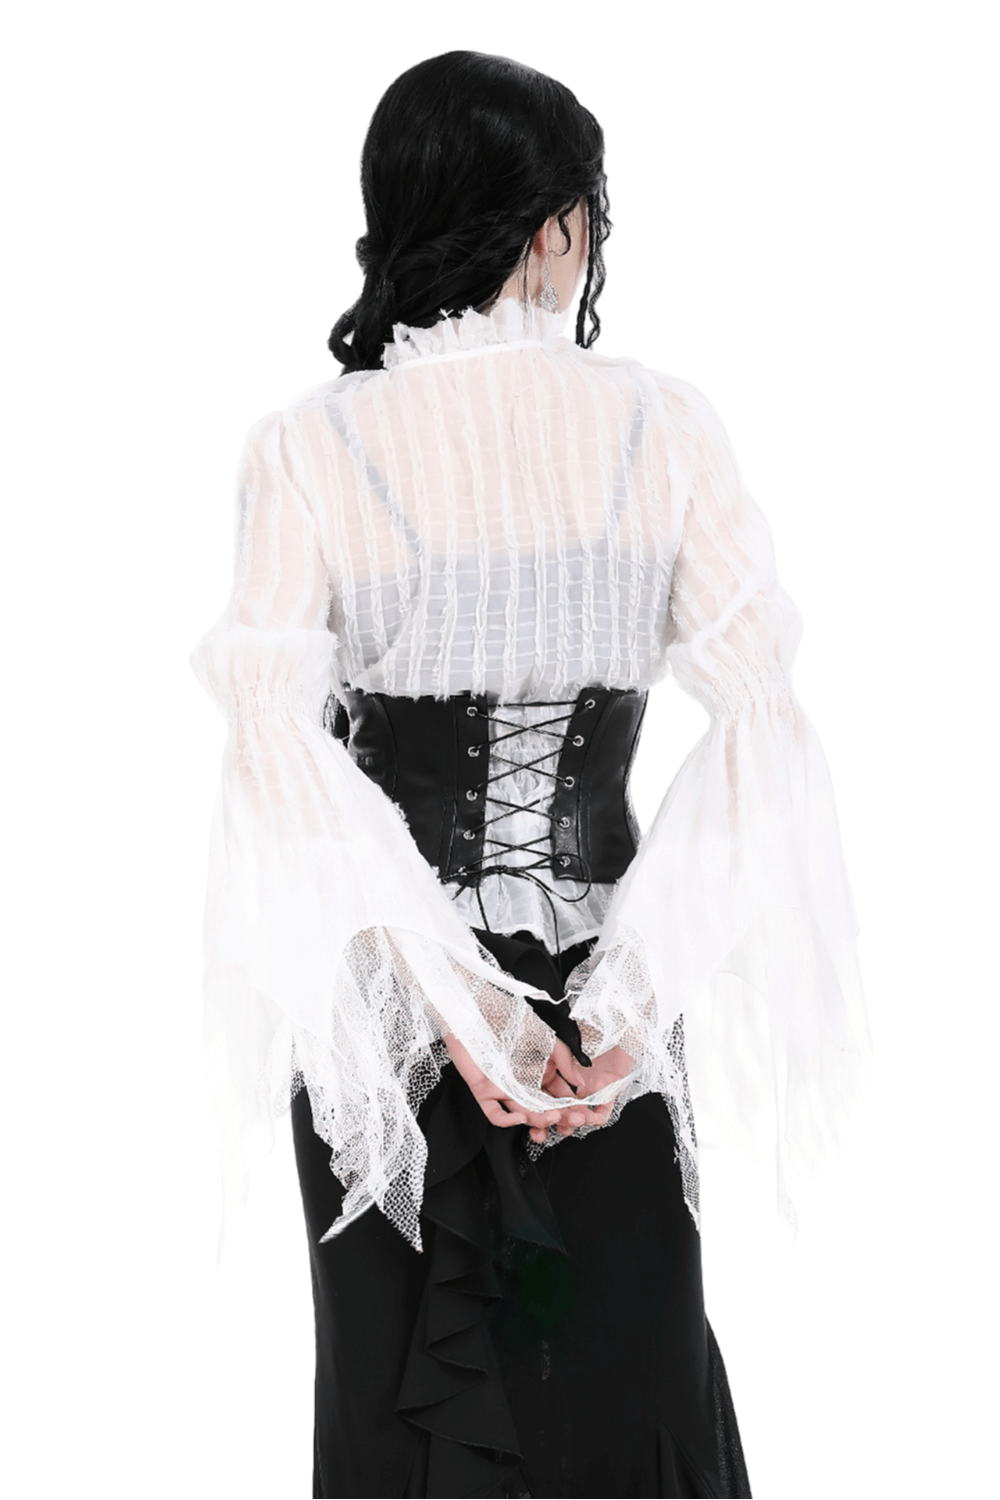 Elegant Ruffle Neck Lace Blouse with Bell Sleeves